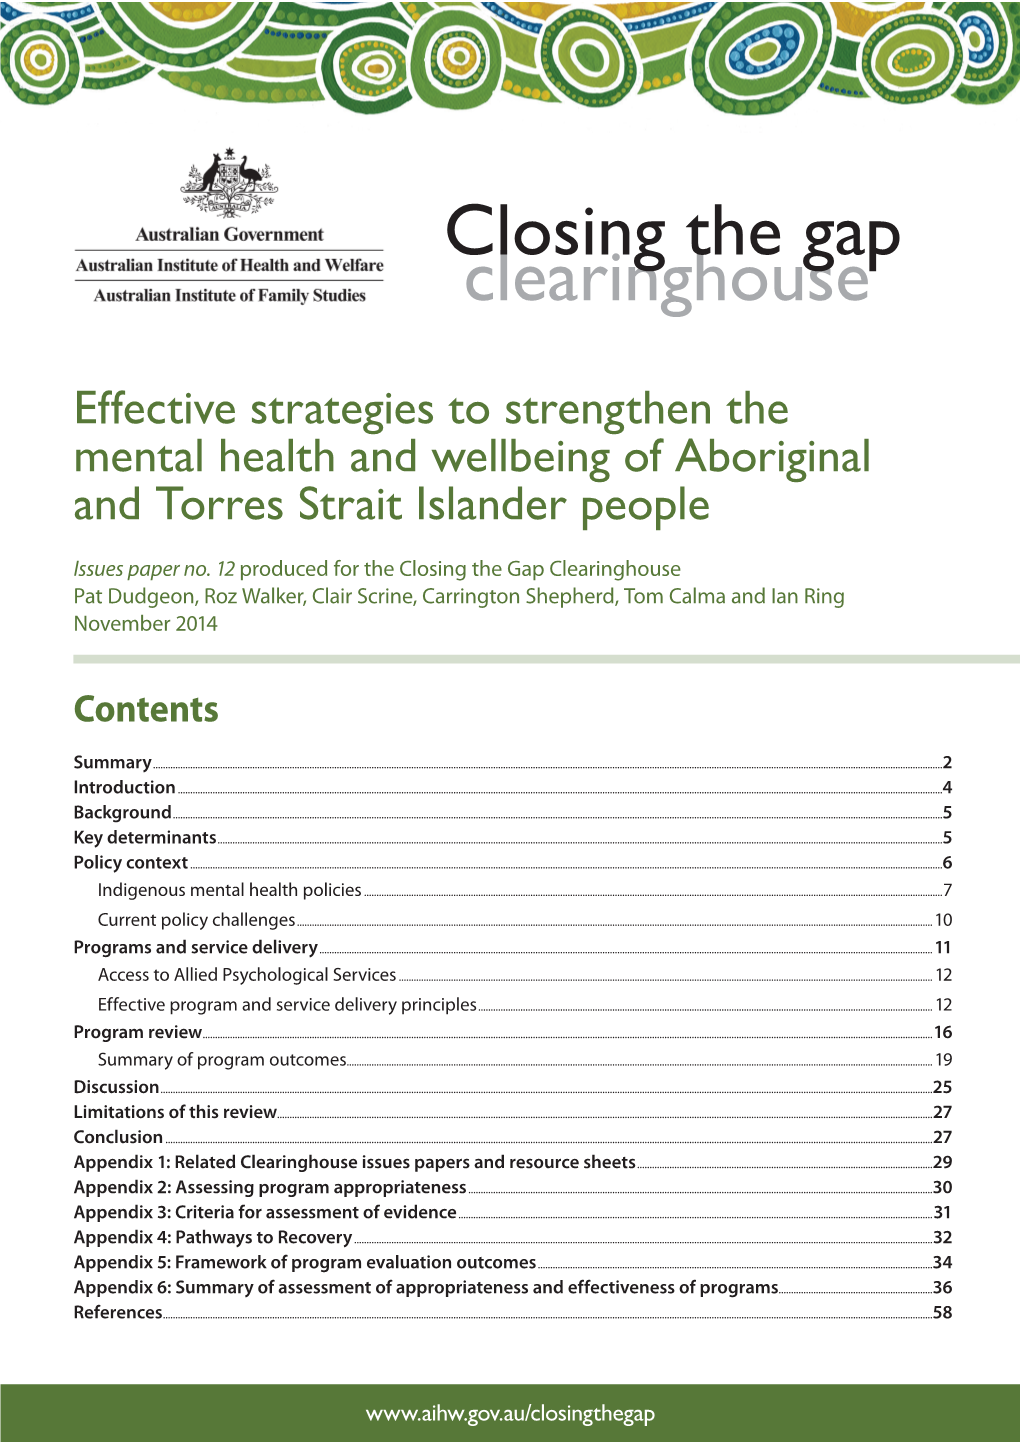 Effective Strategies to Strengthen the Mental Health and Wellbeing of Aboriginal and Torres Strait Islander People